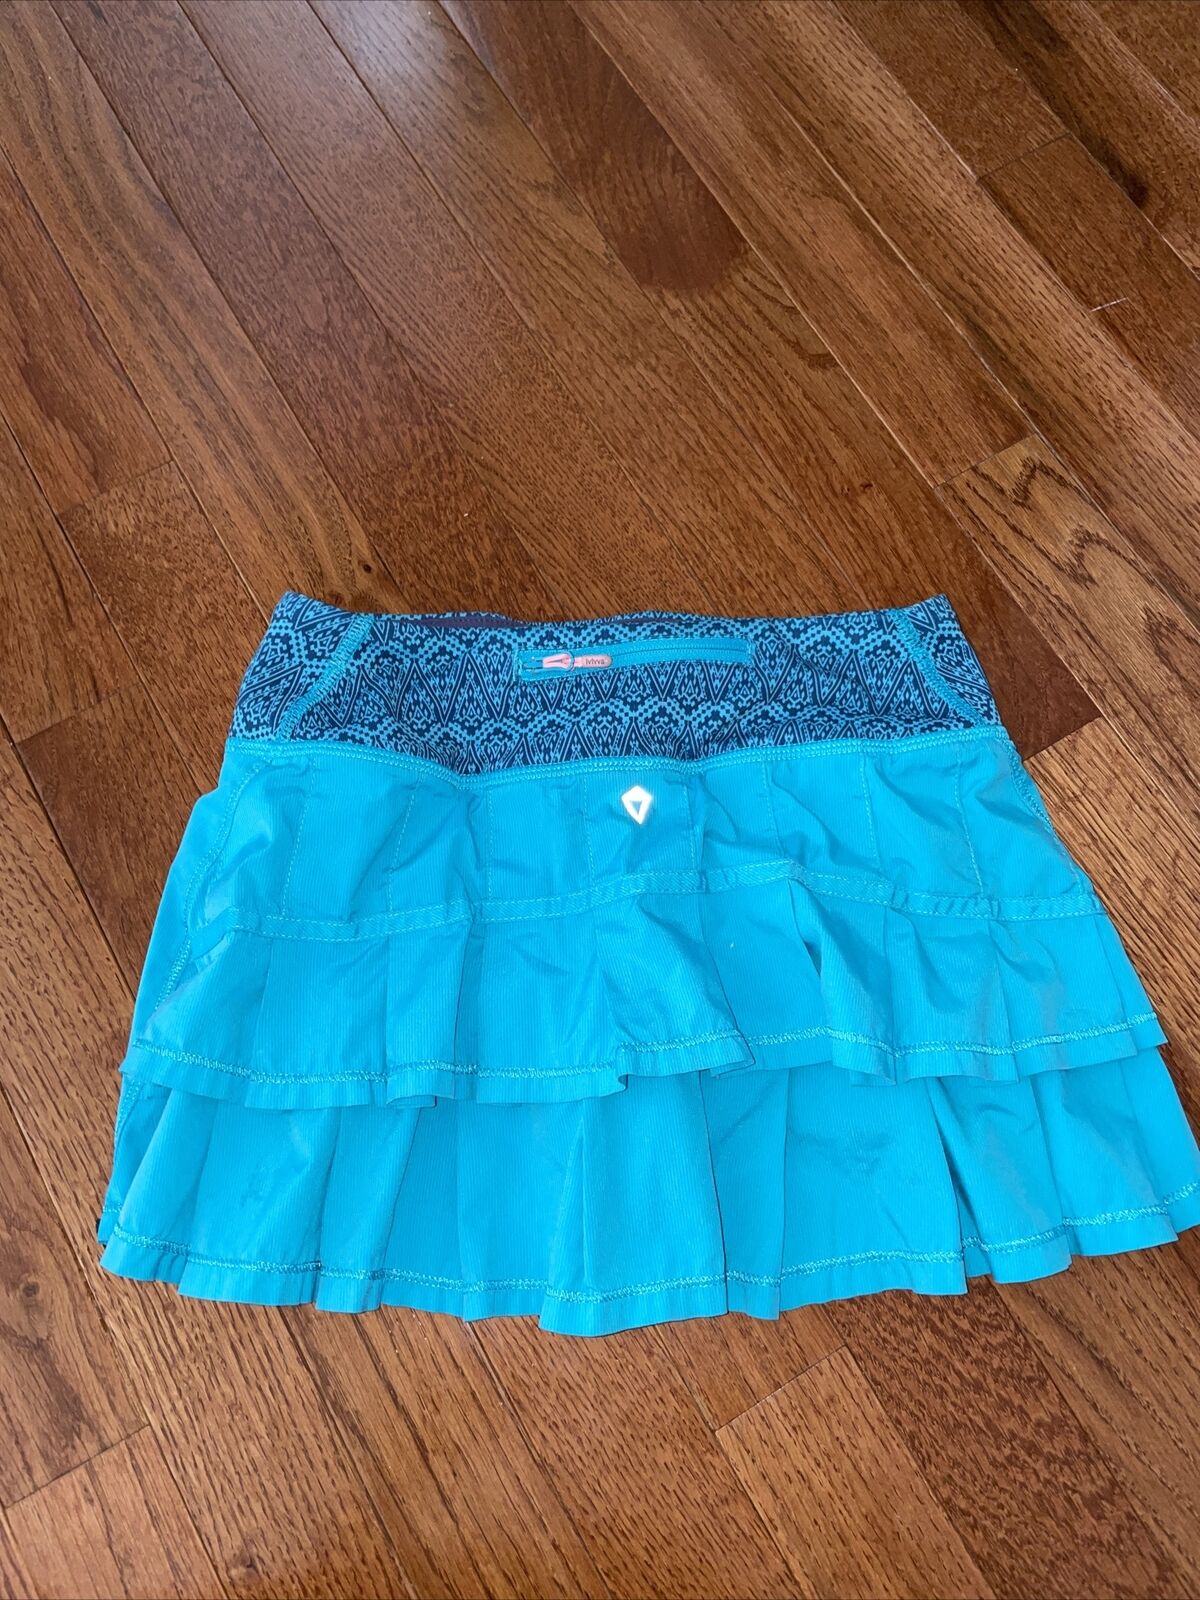 Ivivva Teal Blue Set The Pace Ruffle Skirt Size 10